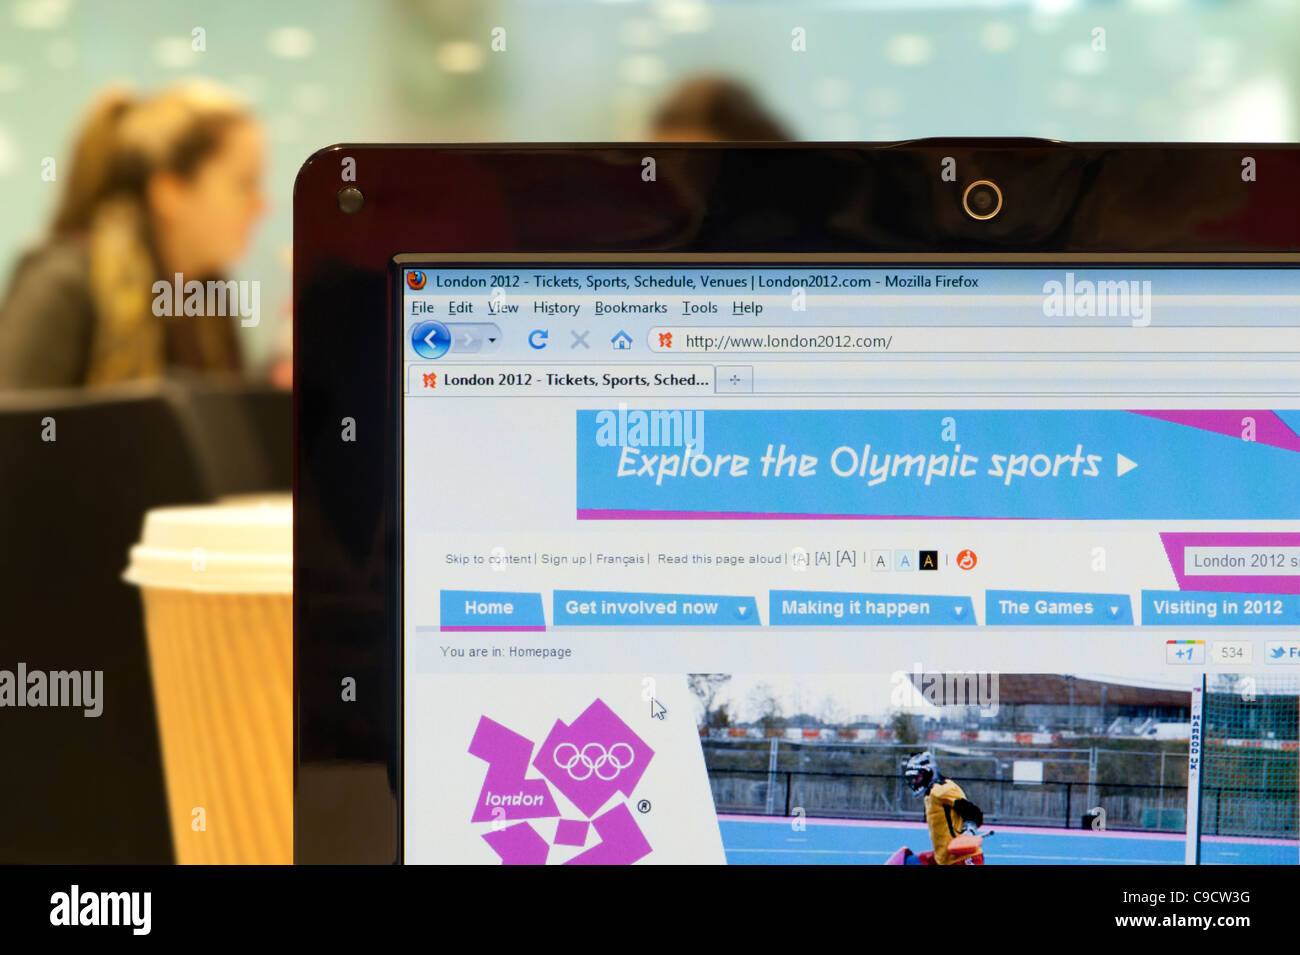 The London 2012 website shot in a coffee shop environment (Editorial use only: print, TV, e-book and editorial website). Stock Photo